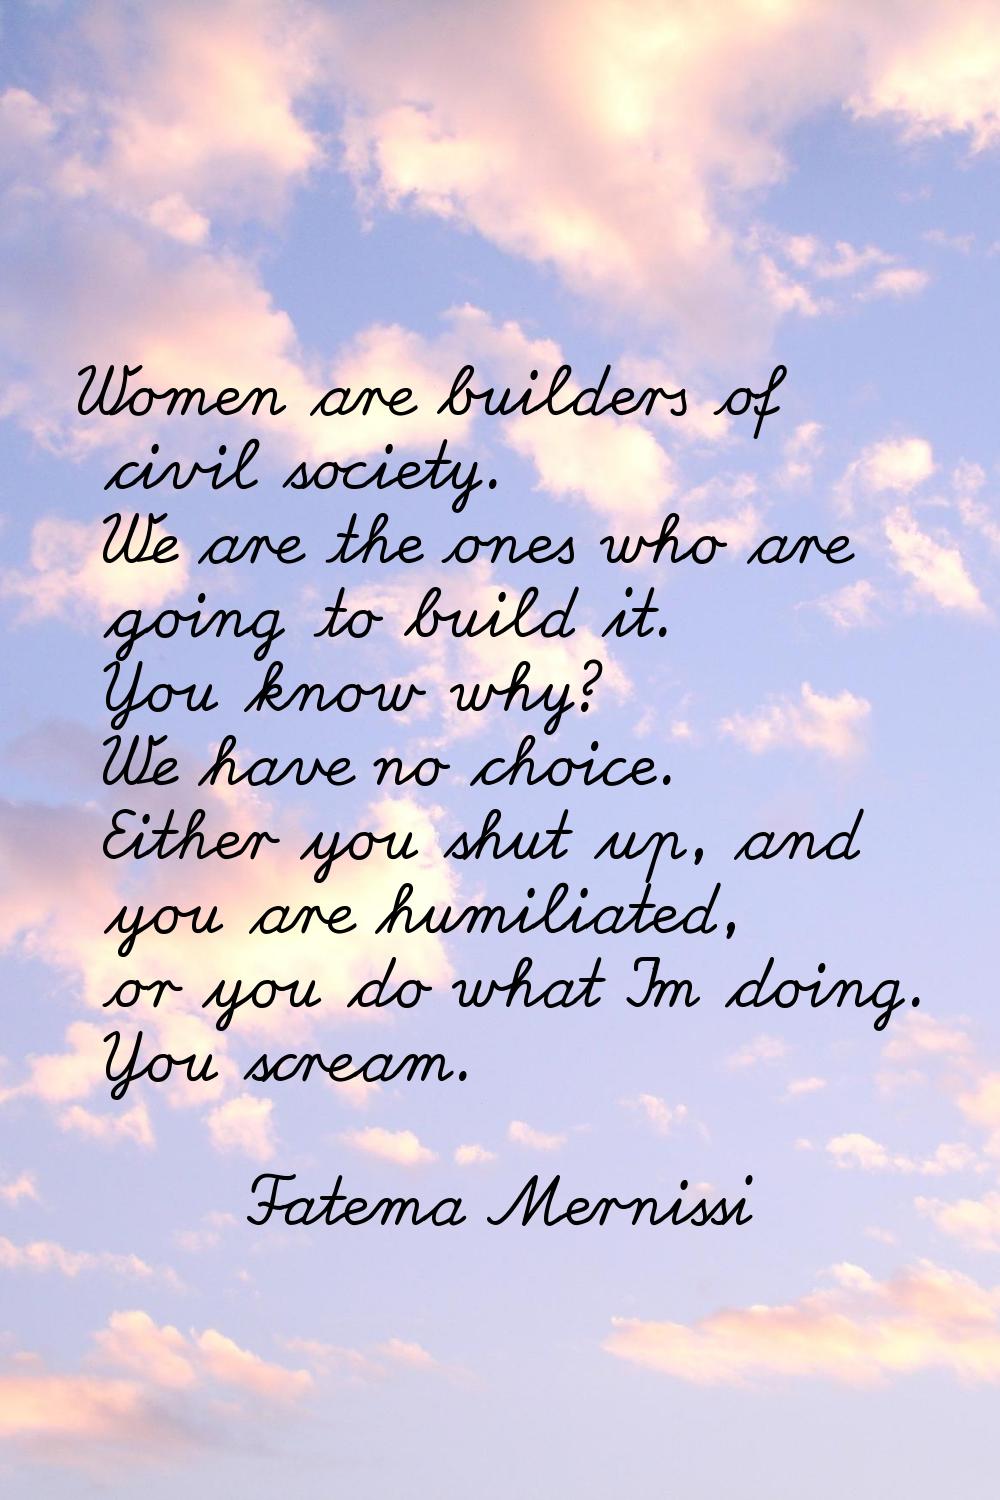 Women are builders of civil society. We are the ones who are going to build it. You know why? We ha